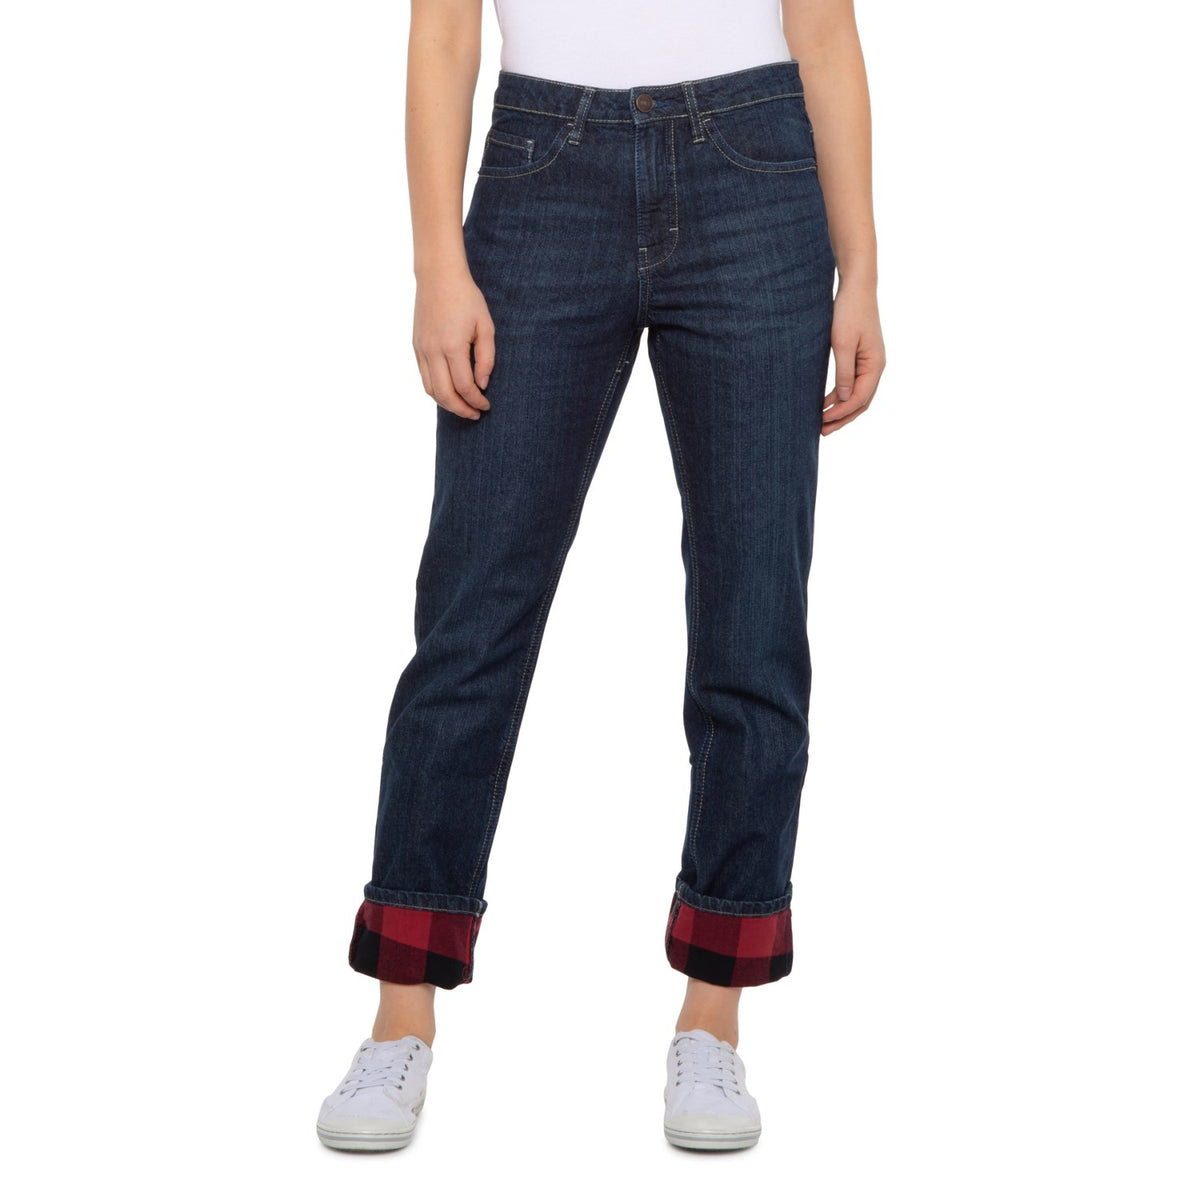 Women's Flannel Lined Jeans – Insulated Gear